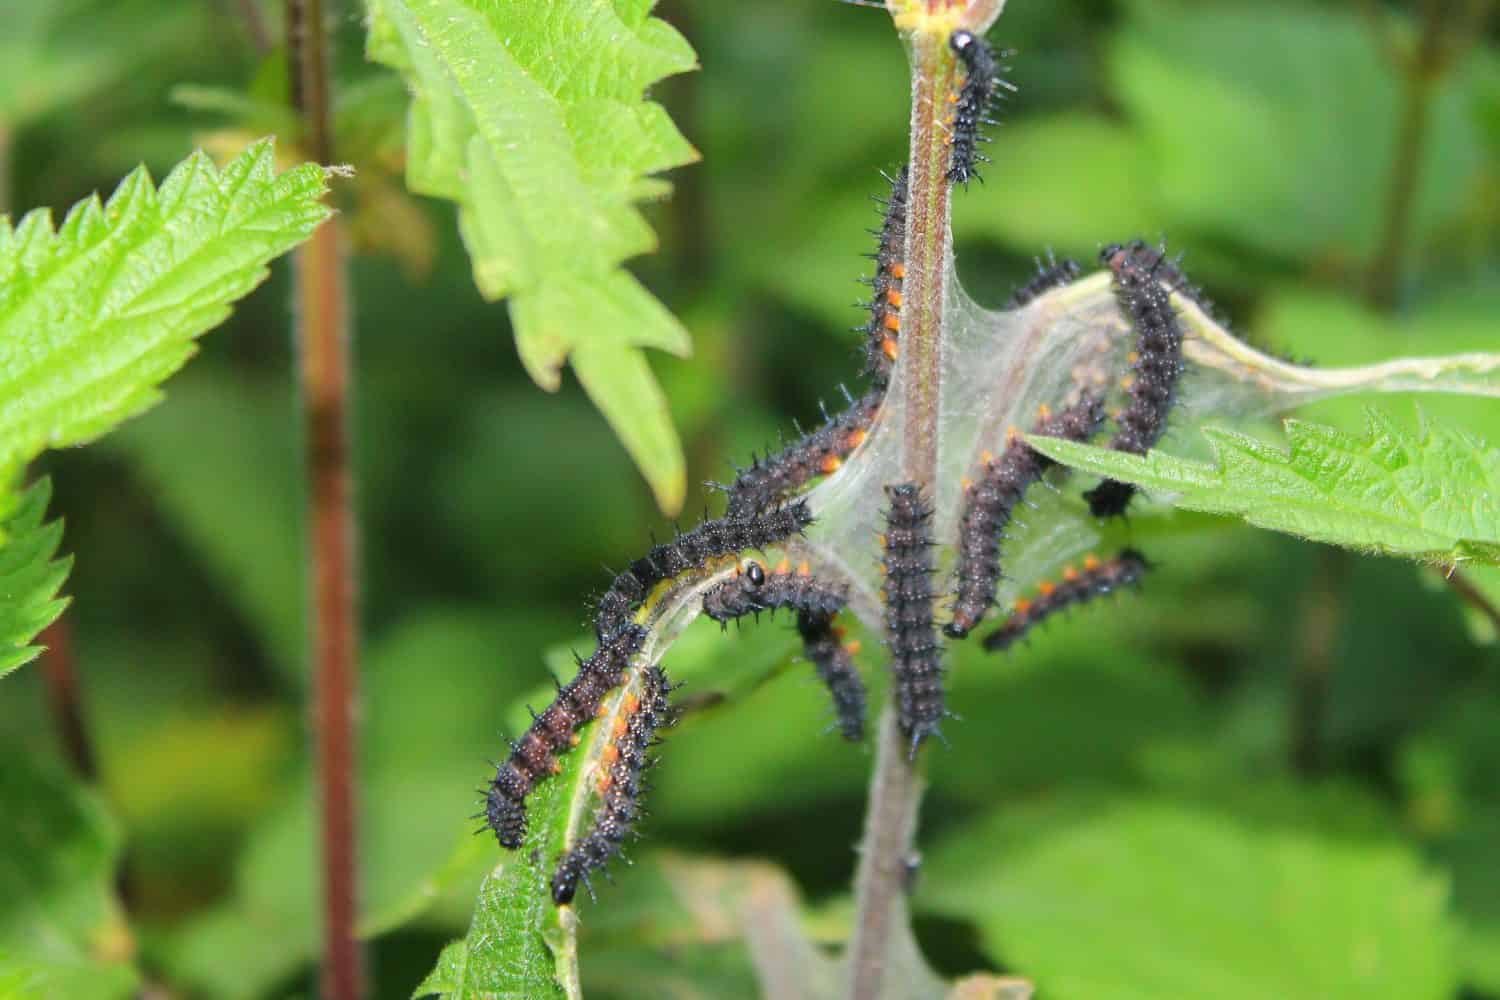 Red admiral butterfly caterpillars on stinging nettles in England.